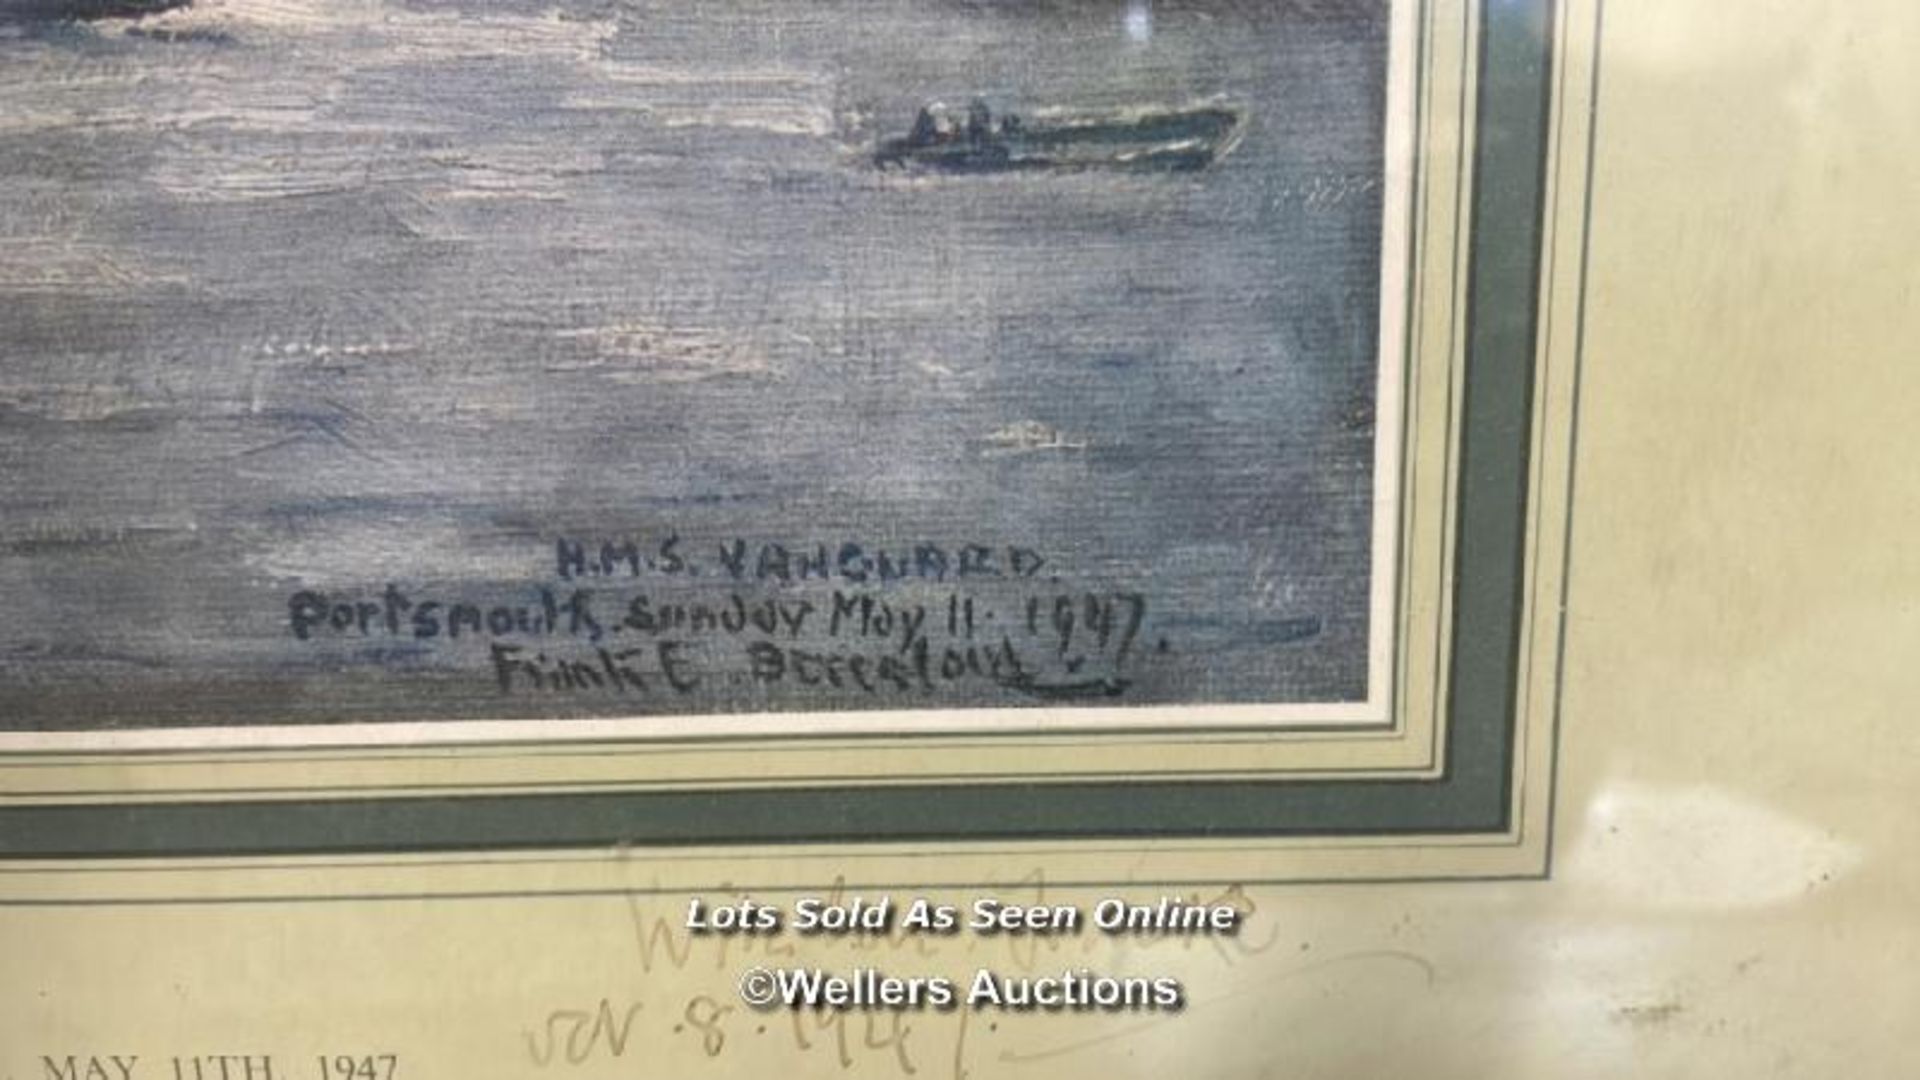 H.M.S. VANGUARD - FRAMED PRINT 'HOME AGAIN' WITH HAND WRITTEN DEDICATION DATED 1947 43.5 X 31.5CM - Image 3 of 6